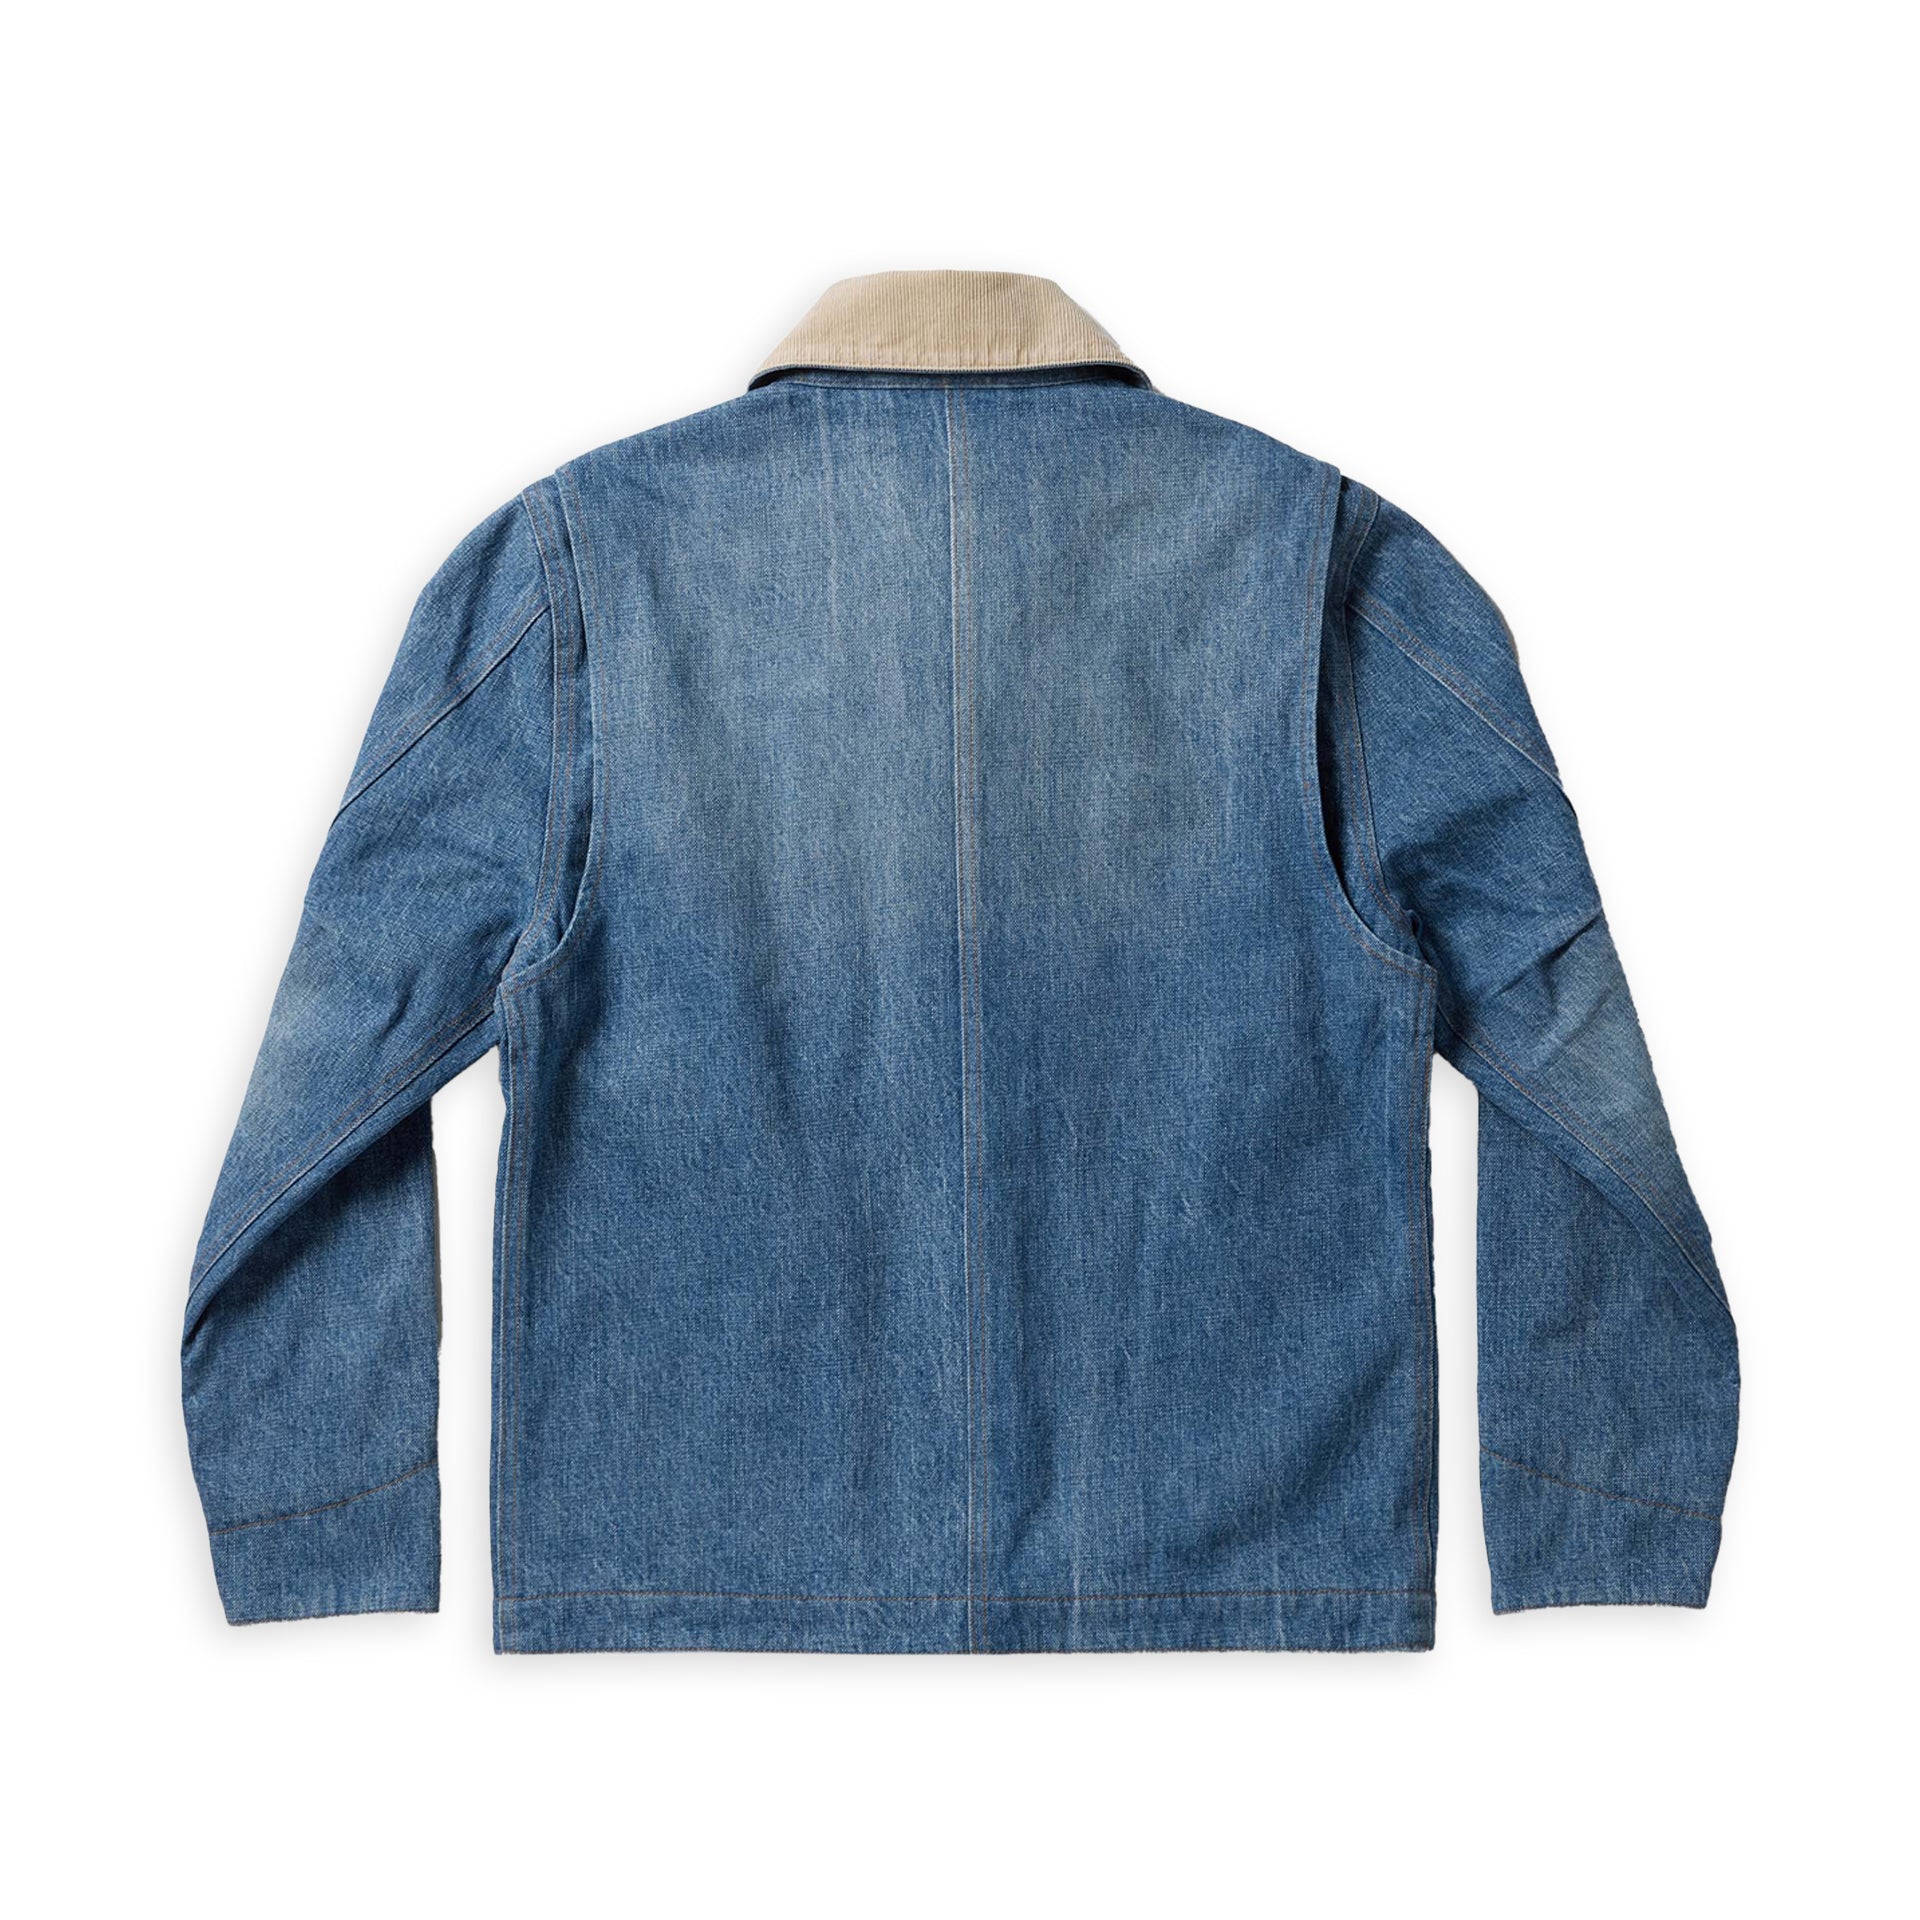 Uncrate Selvage Supply Jacket Workhorse Taylor | Stitch